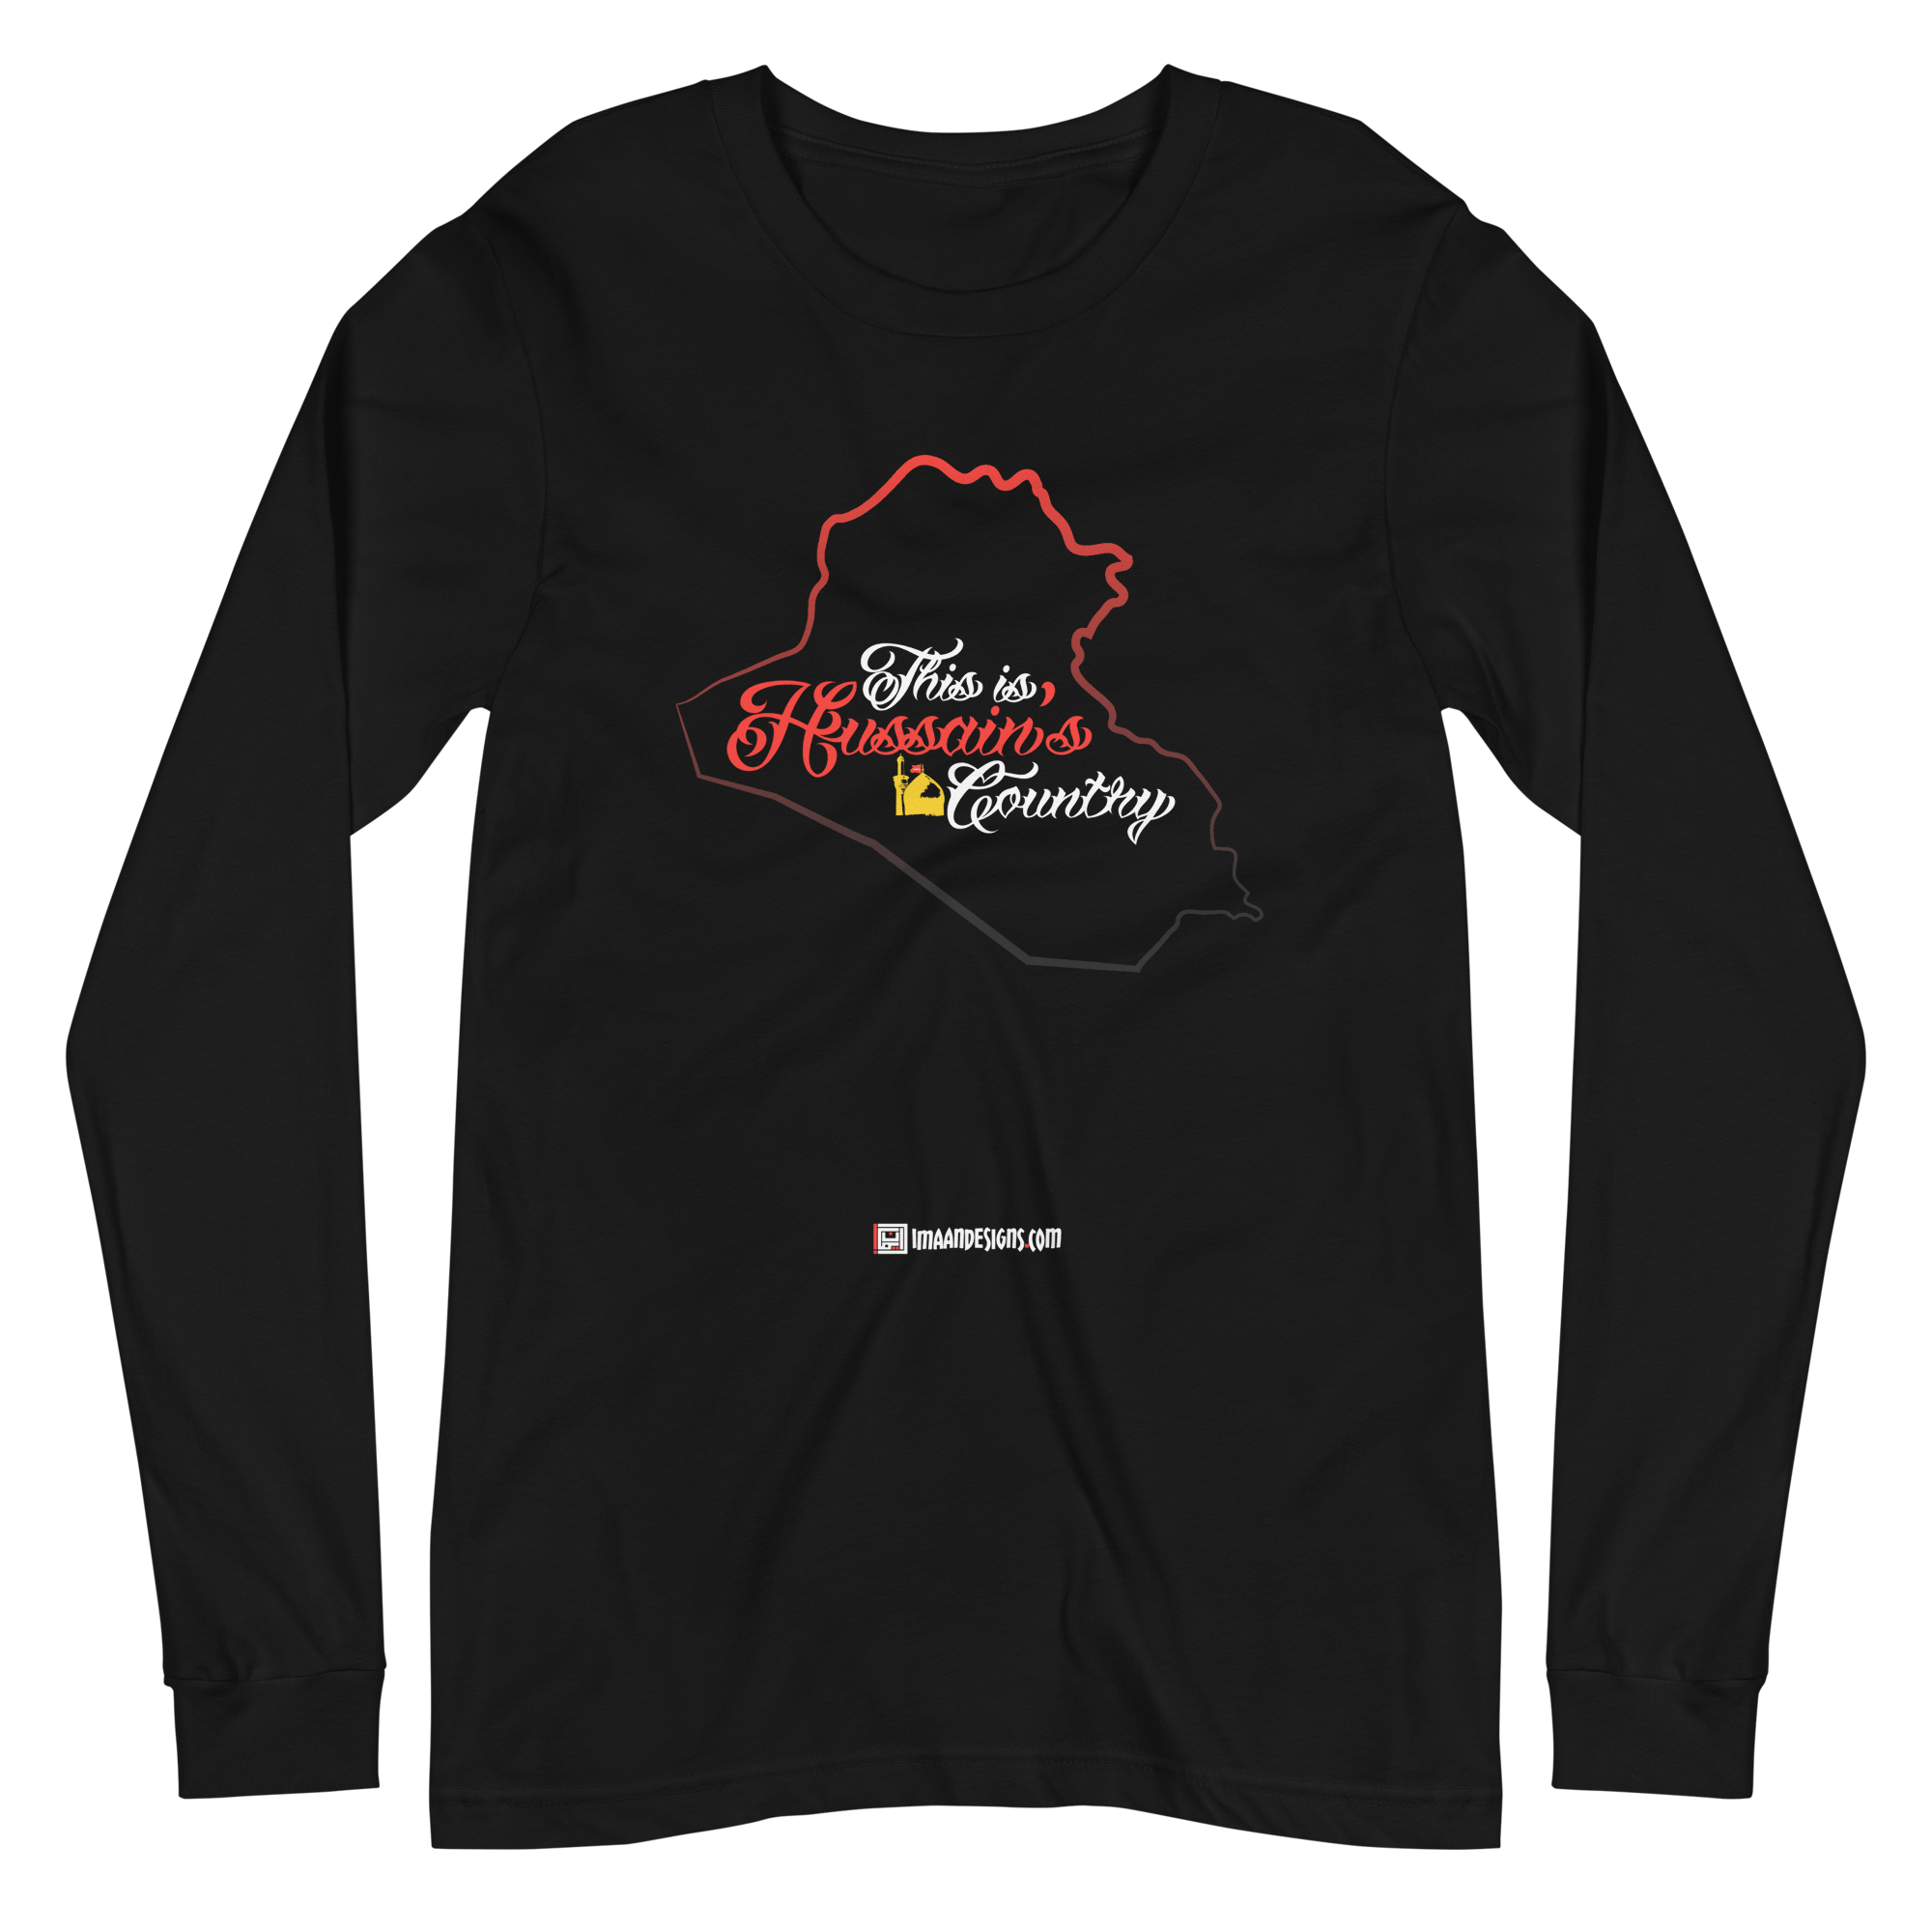 Hussain's Country - Adult Long Sleeve